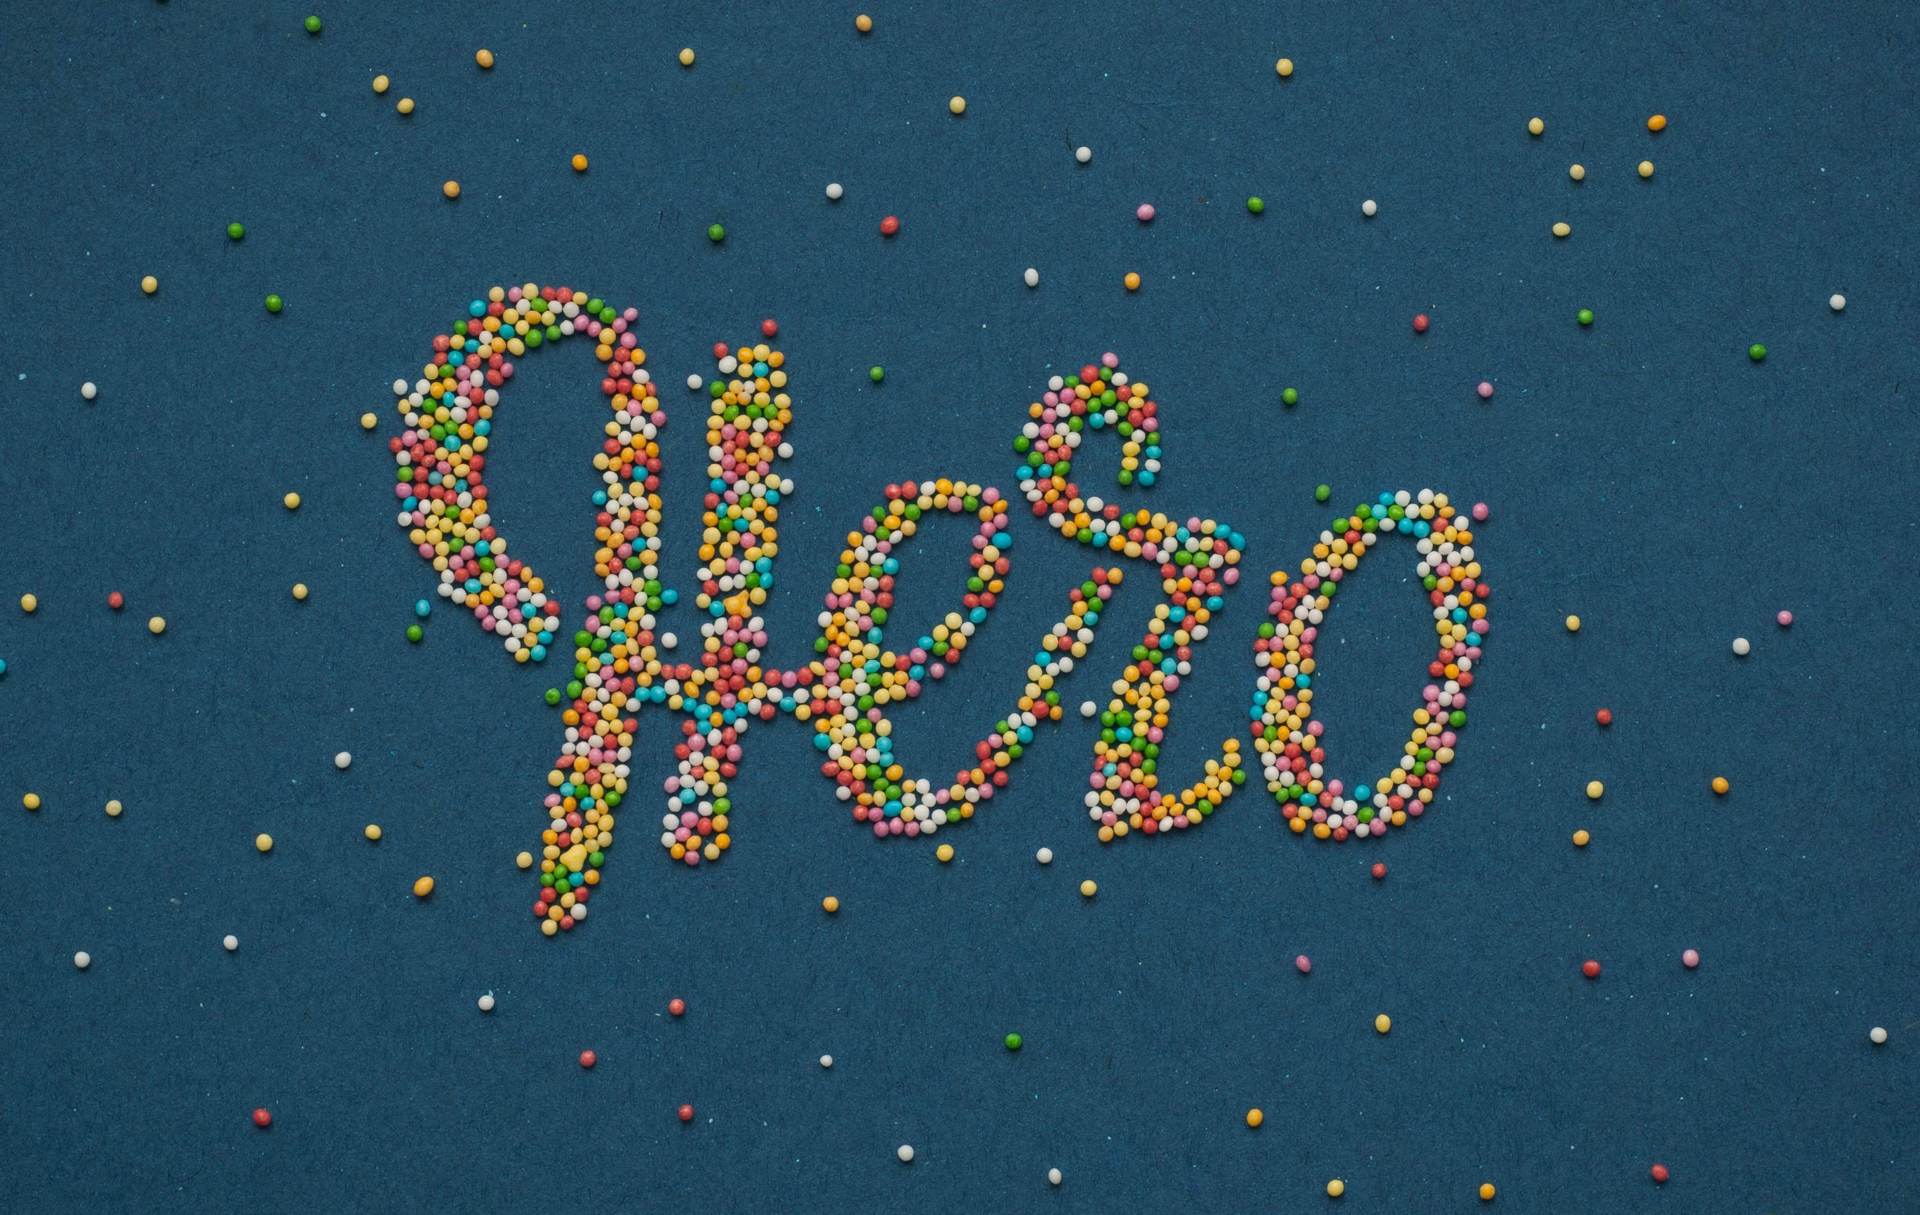 Hero spelled out in coloured balls